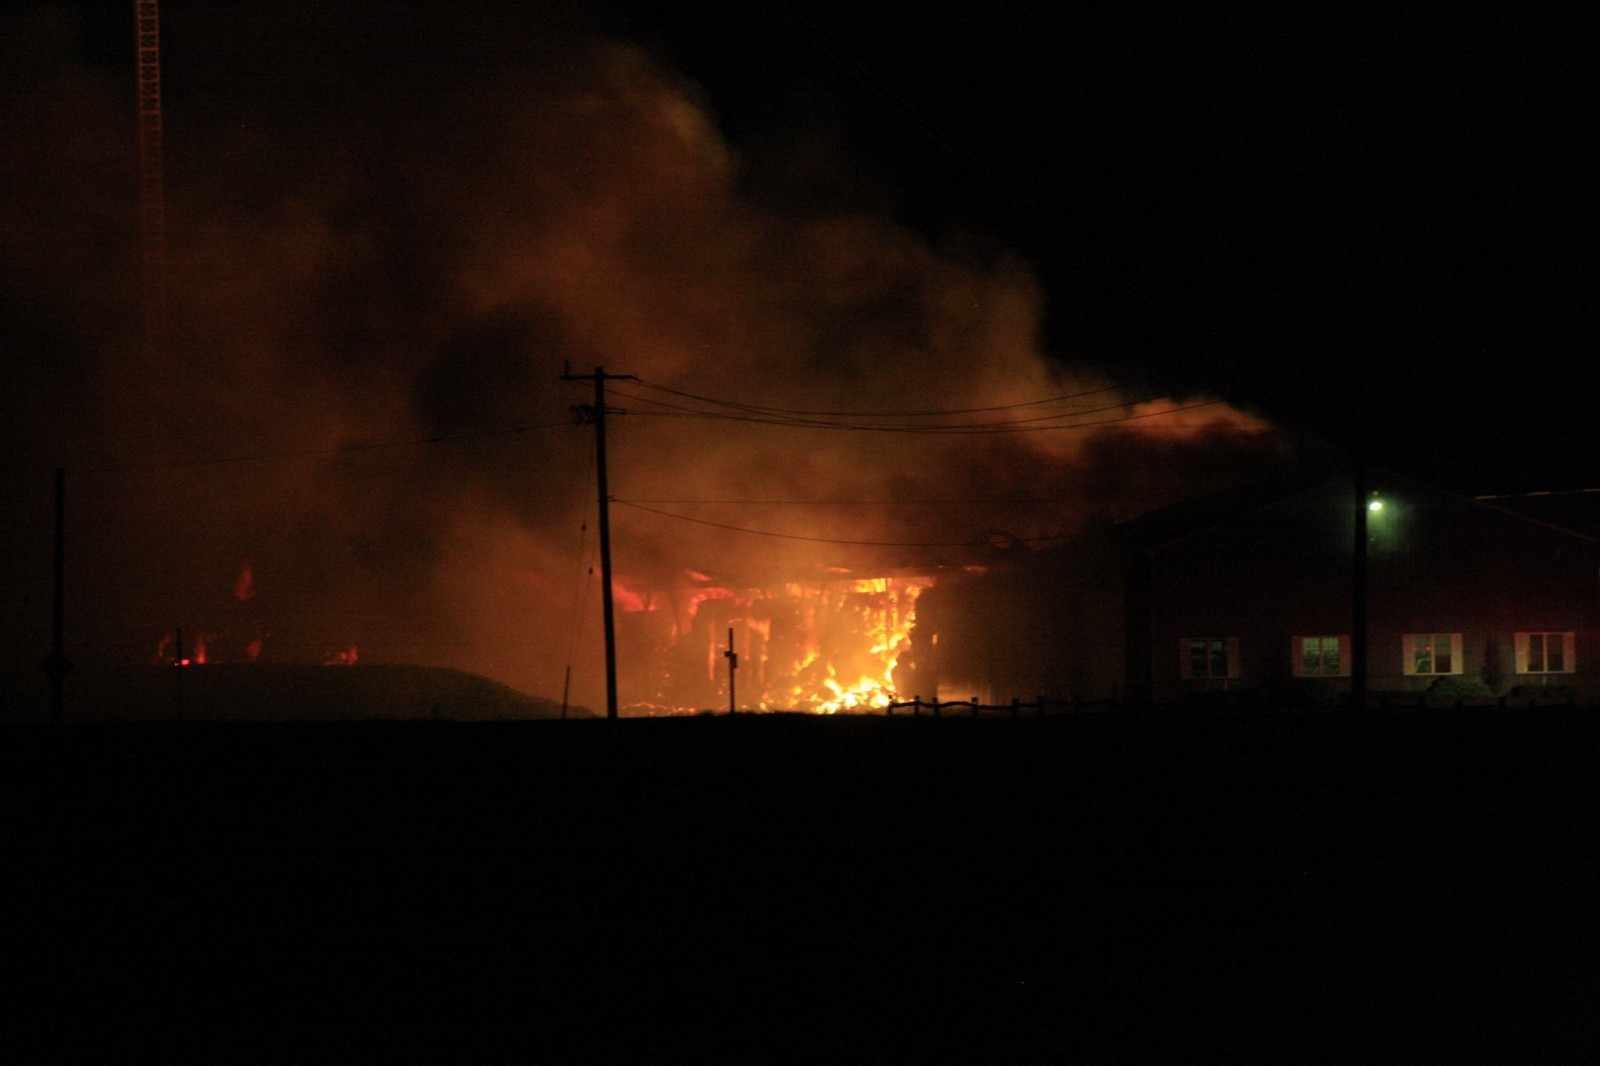 Barn-fire-may-28-14-south-of-401